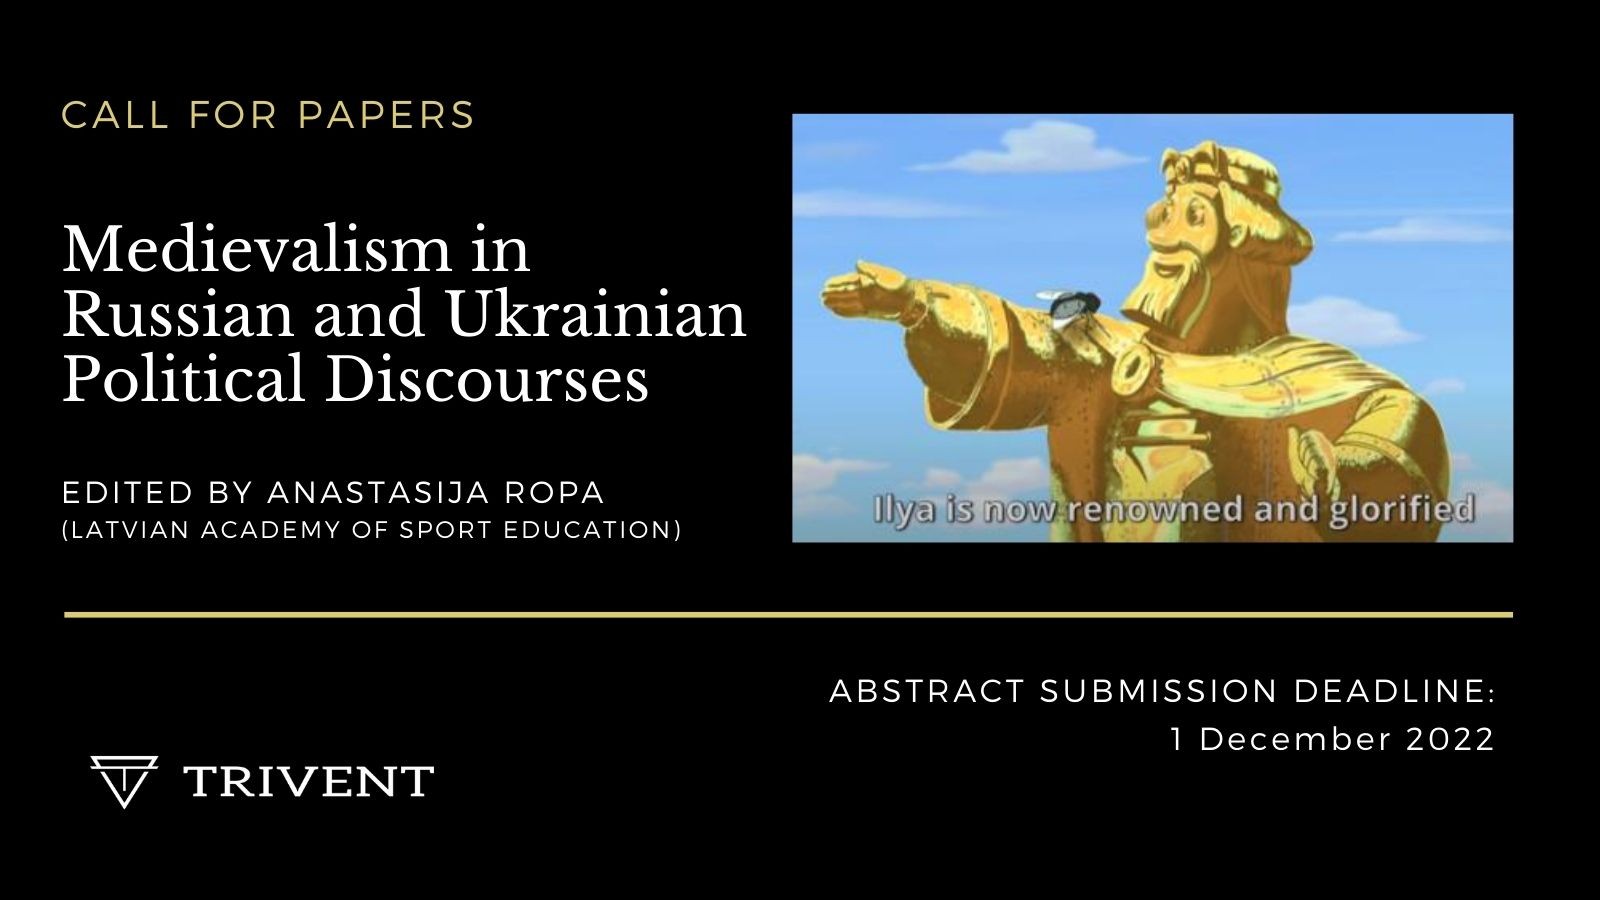 Medievalism in Russian and Ukrainian Political Discourses